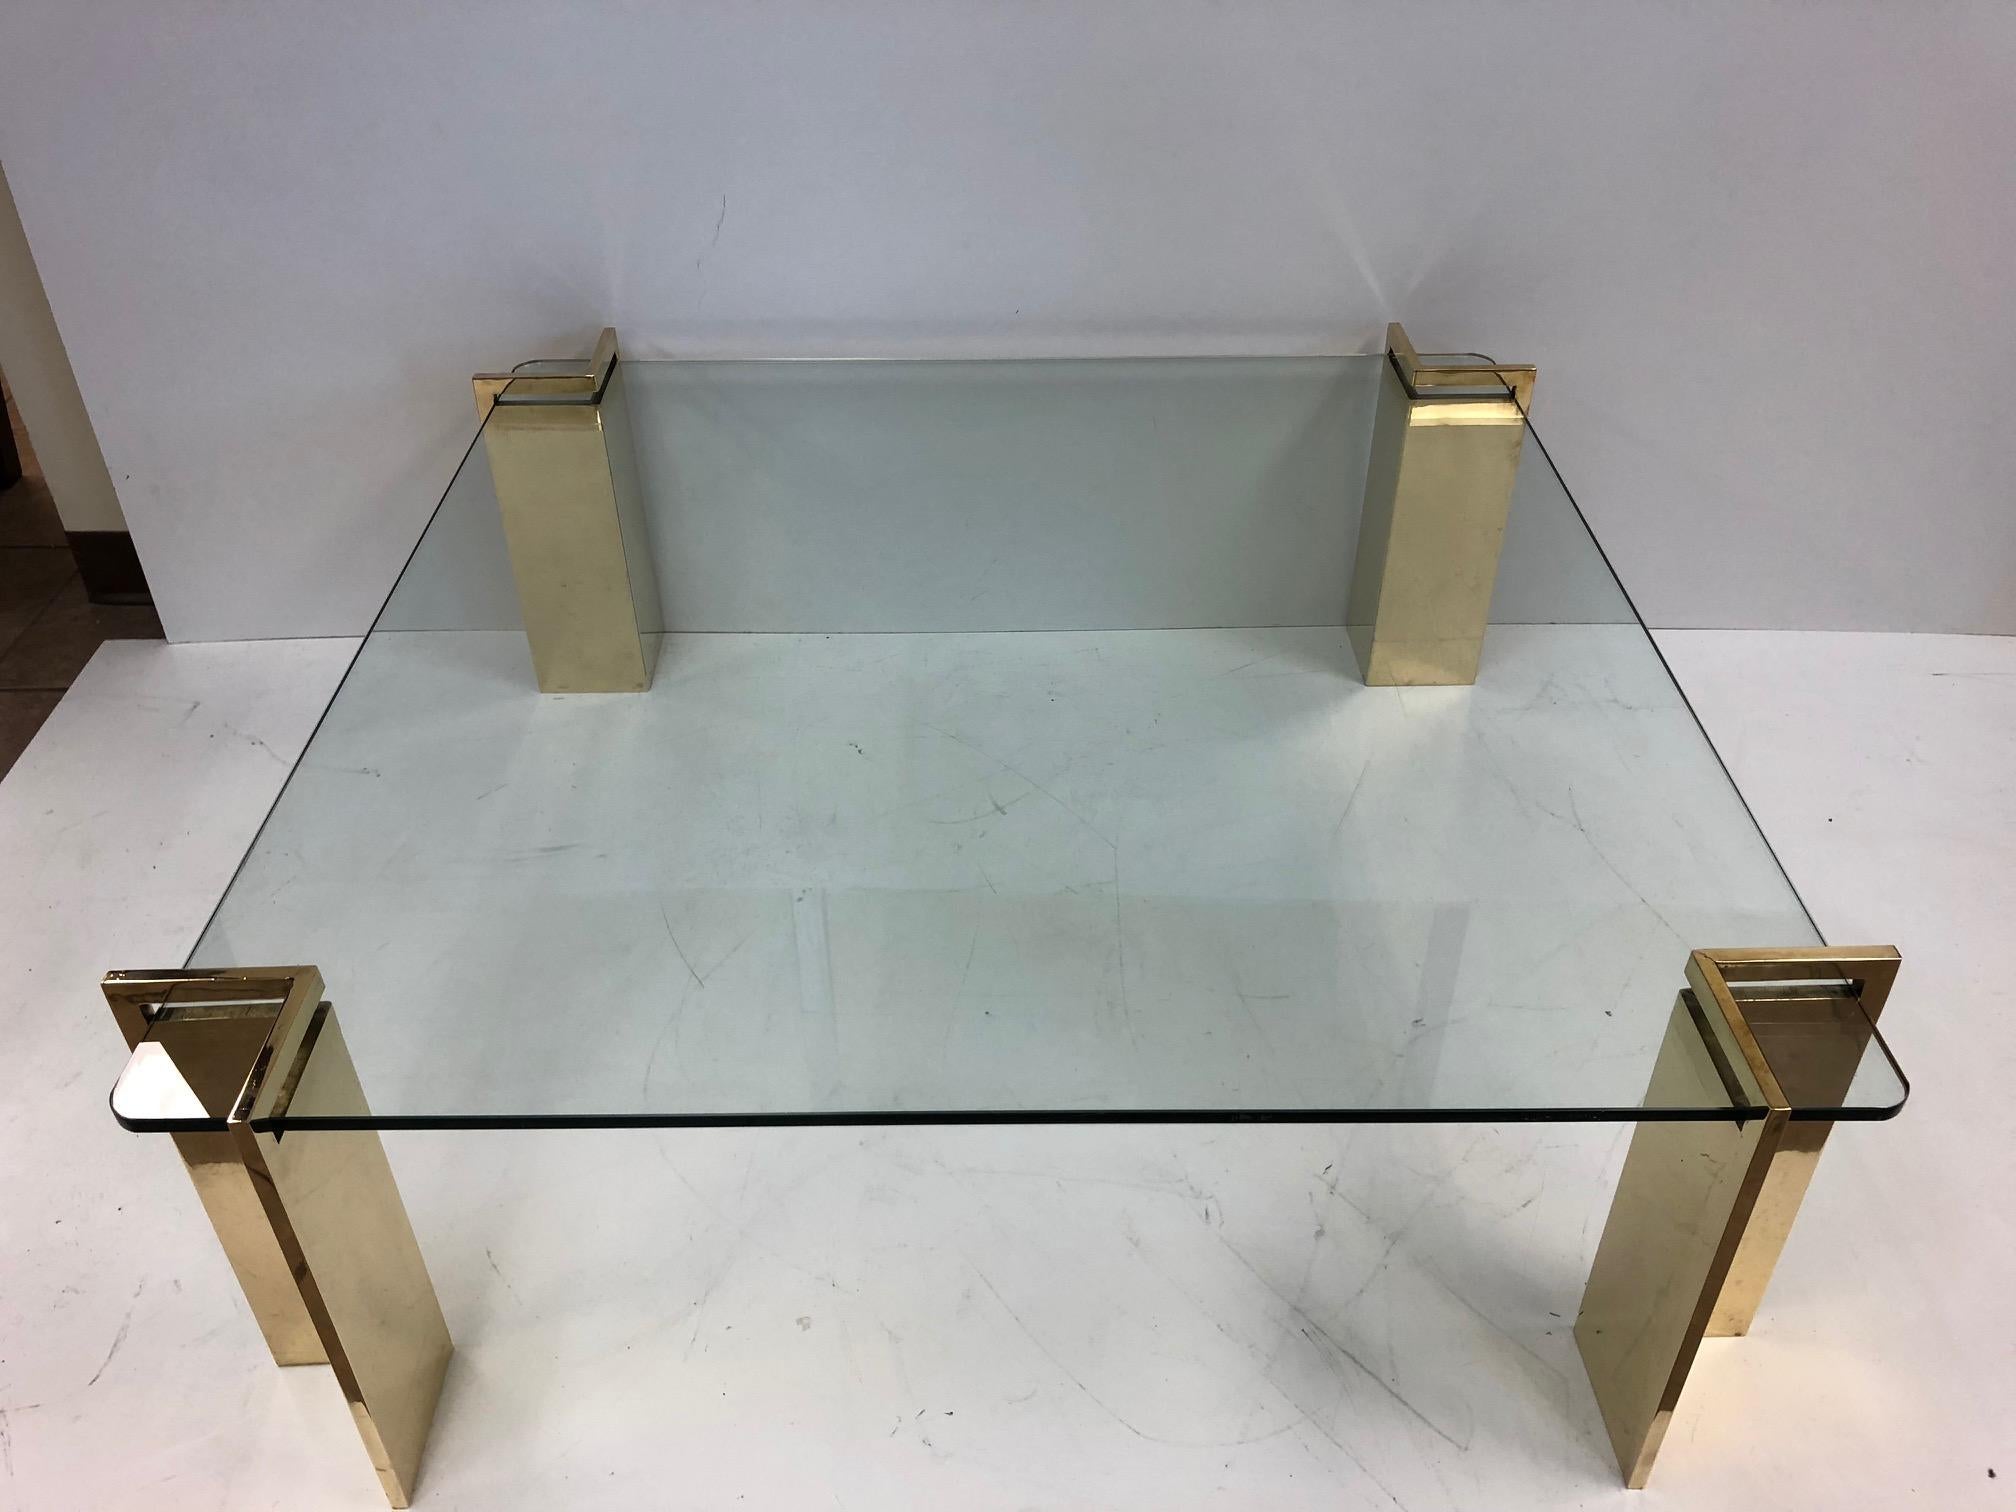 Polished bronze and glass coffee table.
Glass is approximately one inch thick. Four individual bronze bases which weighs approximately 22 pounds each.
  